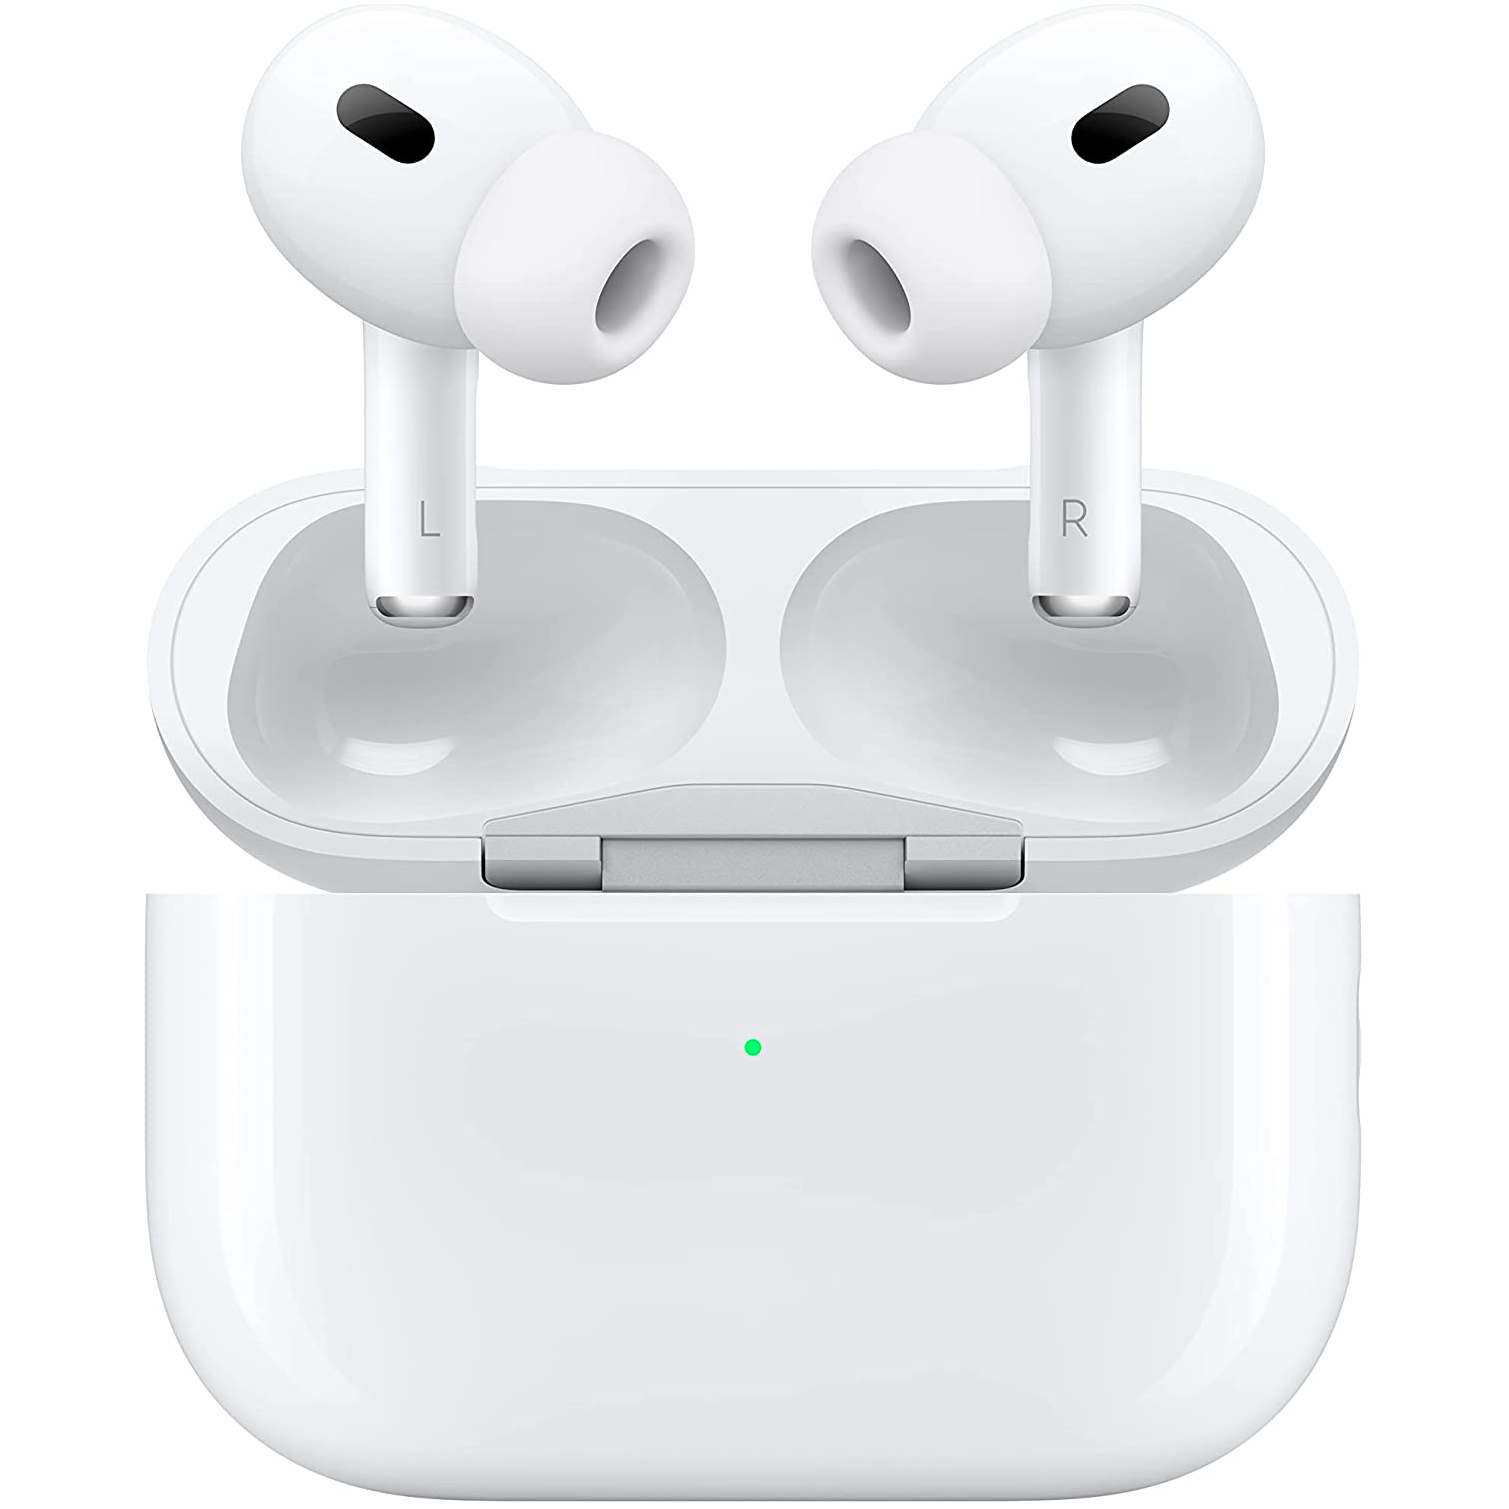 The Apple AirPods Pro 2 on a white background